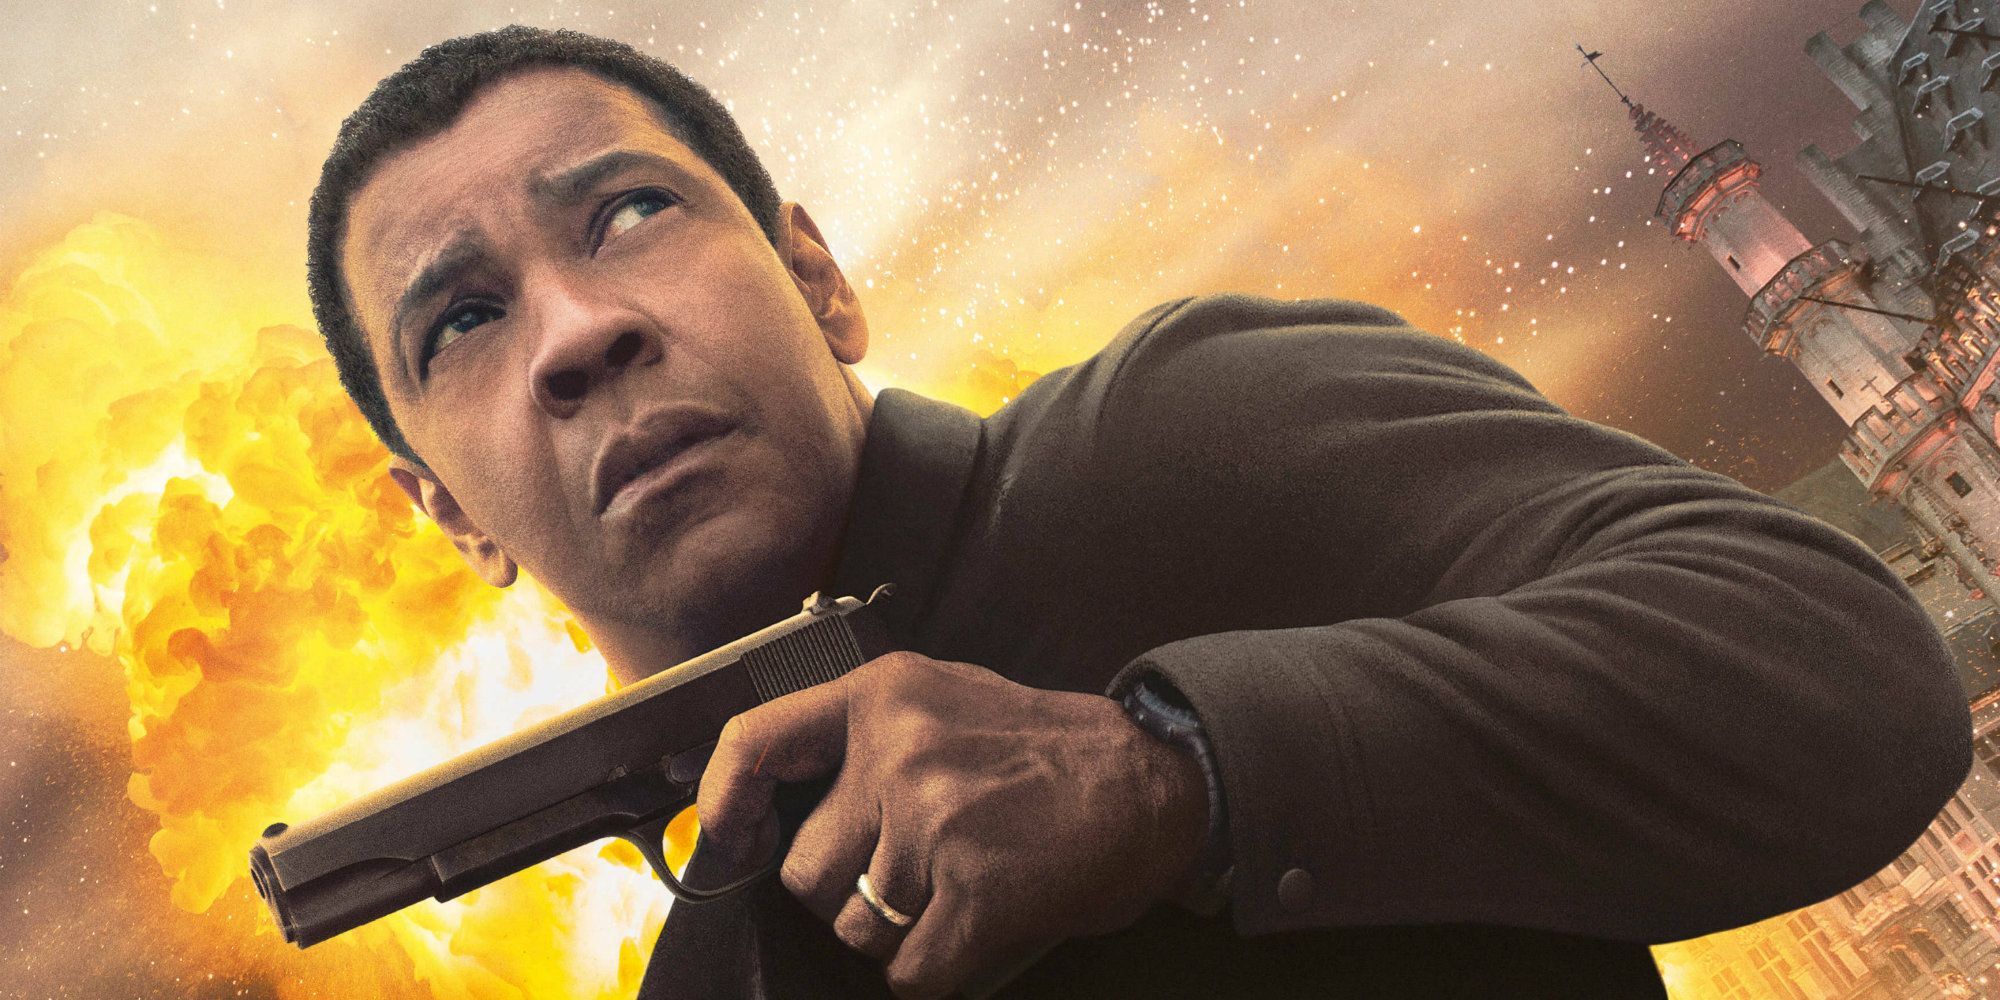 Denzel Washington in the poster for The Equalizer 2